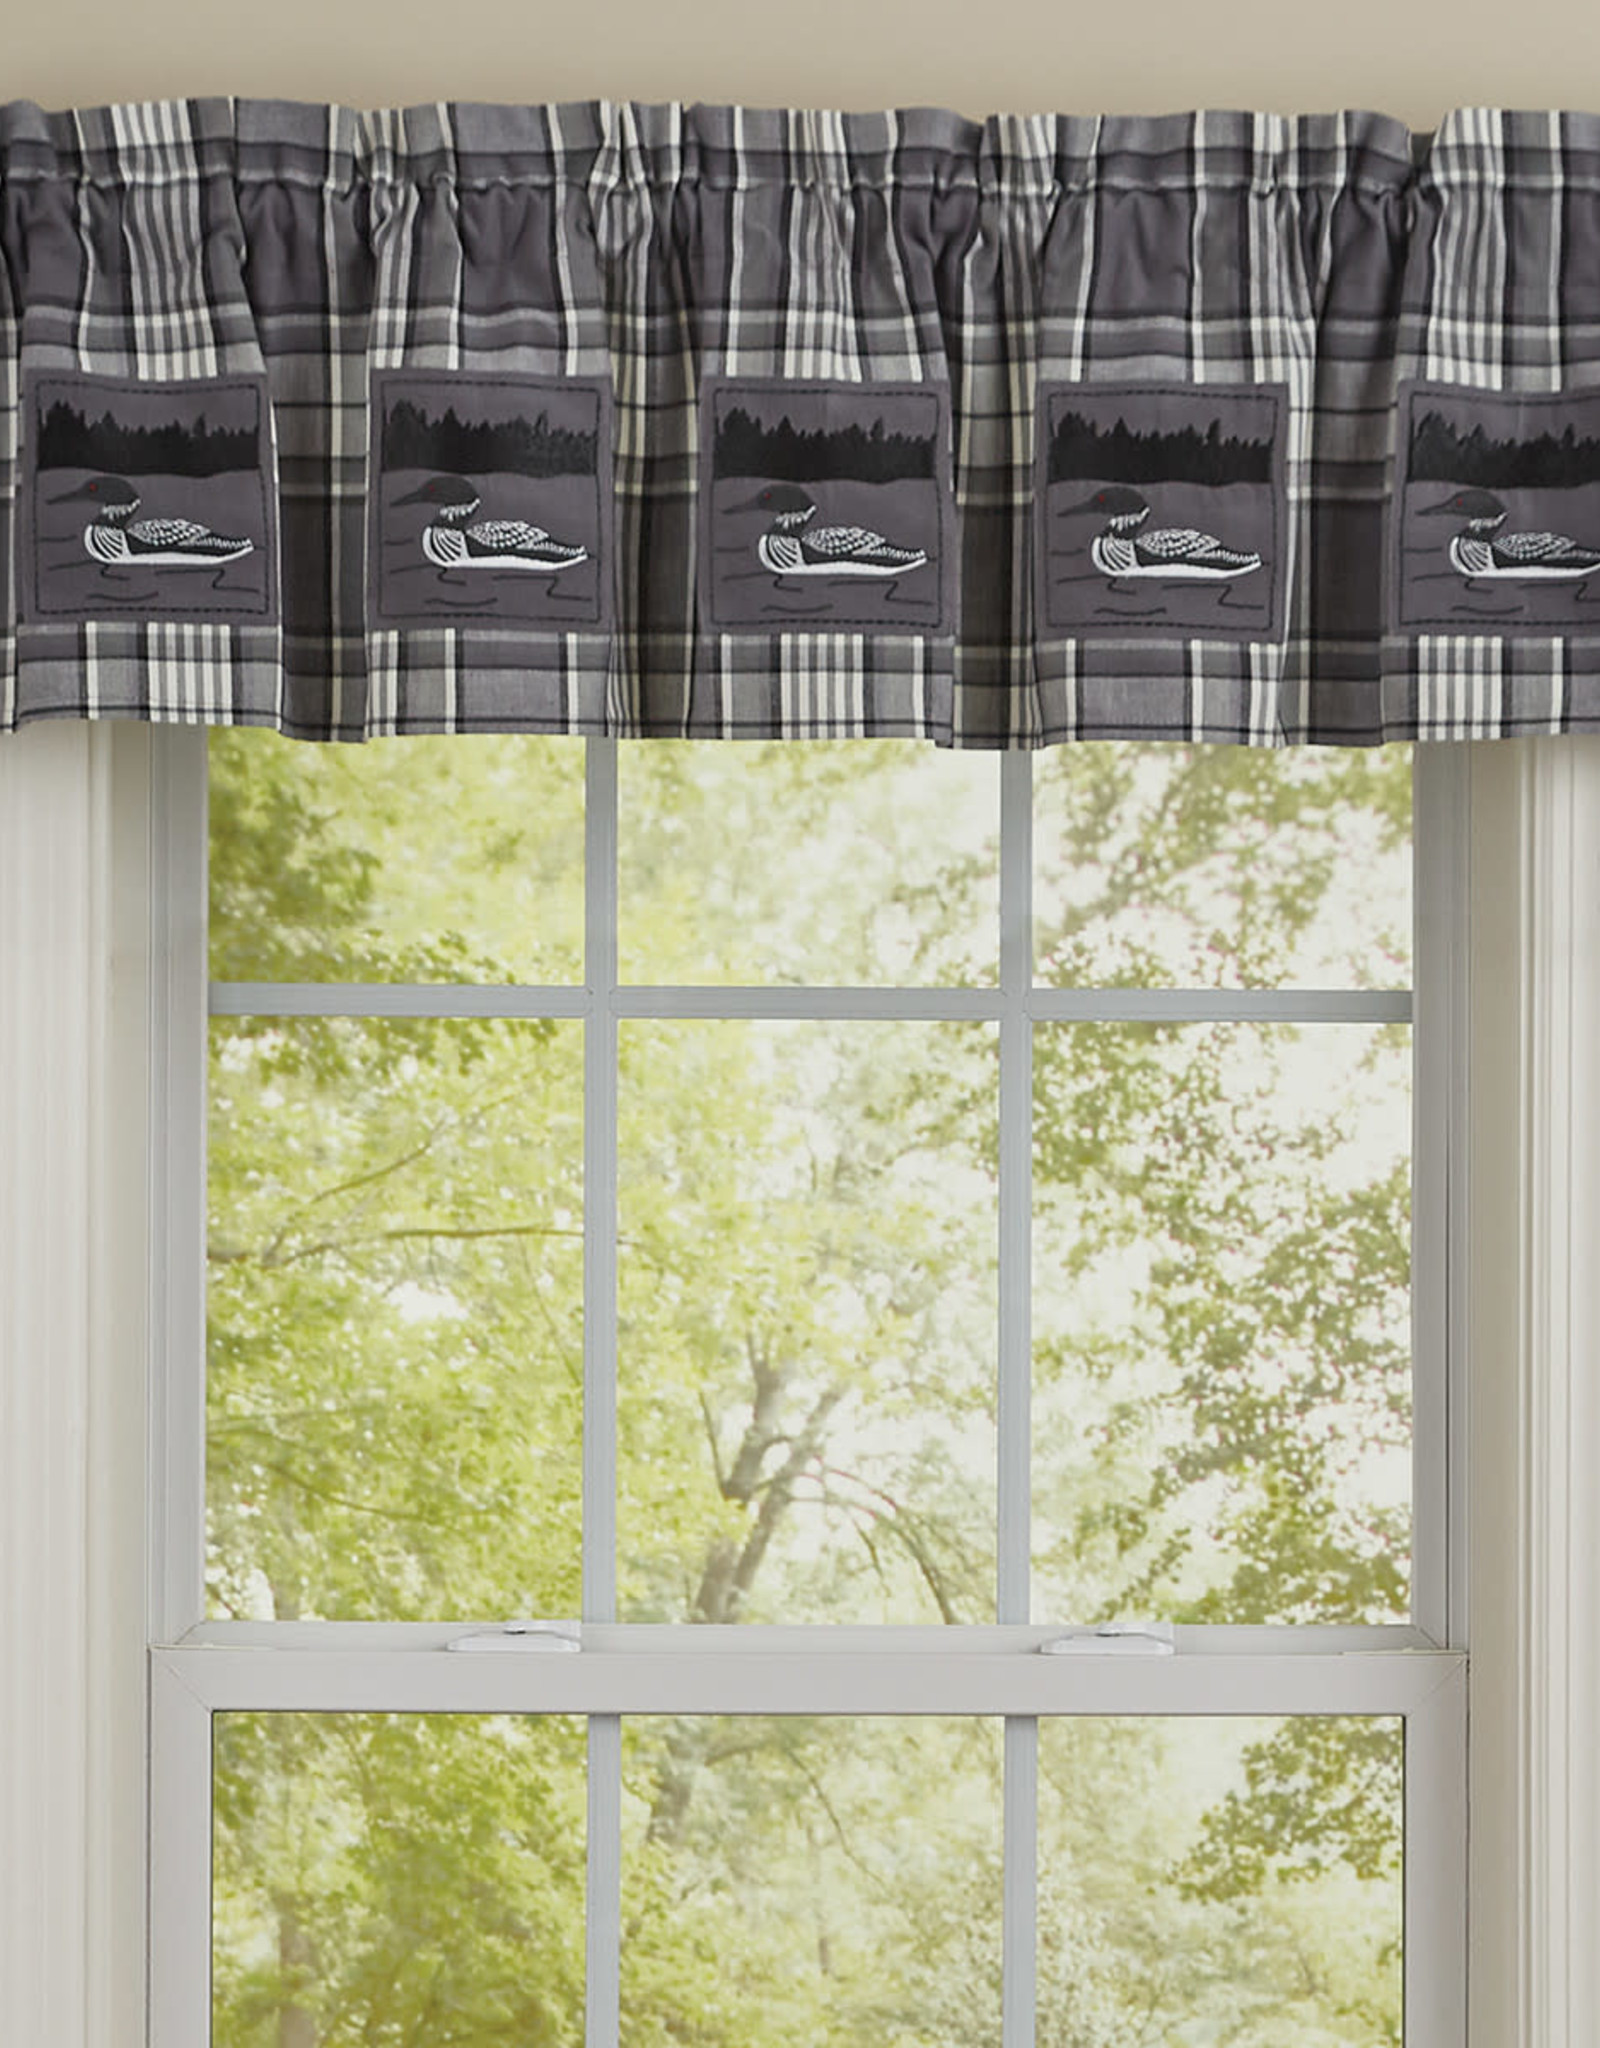 Park Designs Lined Valance - Gray Area Loon